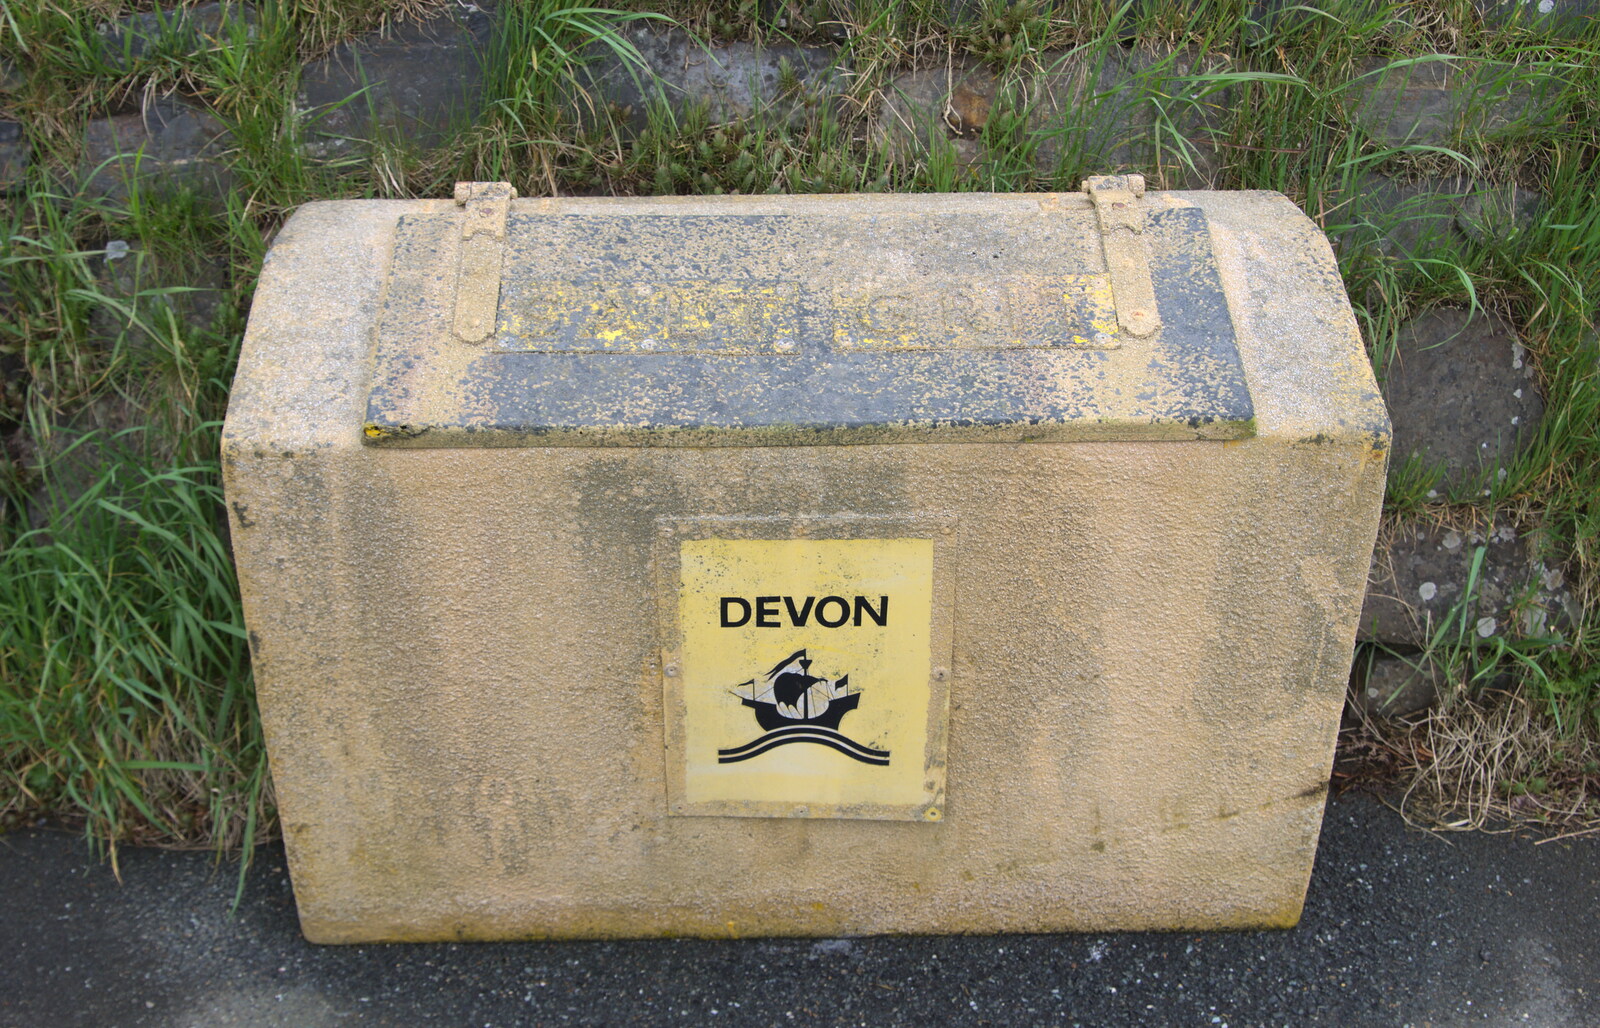 An old-school Devon County Council logo from A Barbeque, Grimspound and Pizza, Dartmoor and Exeter, Devon - 15th April 2017